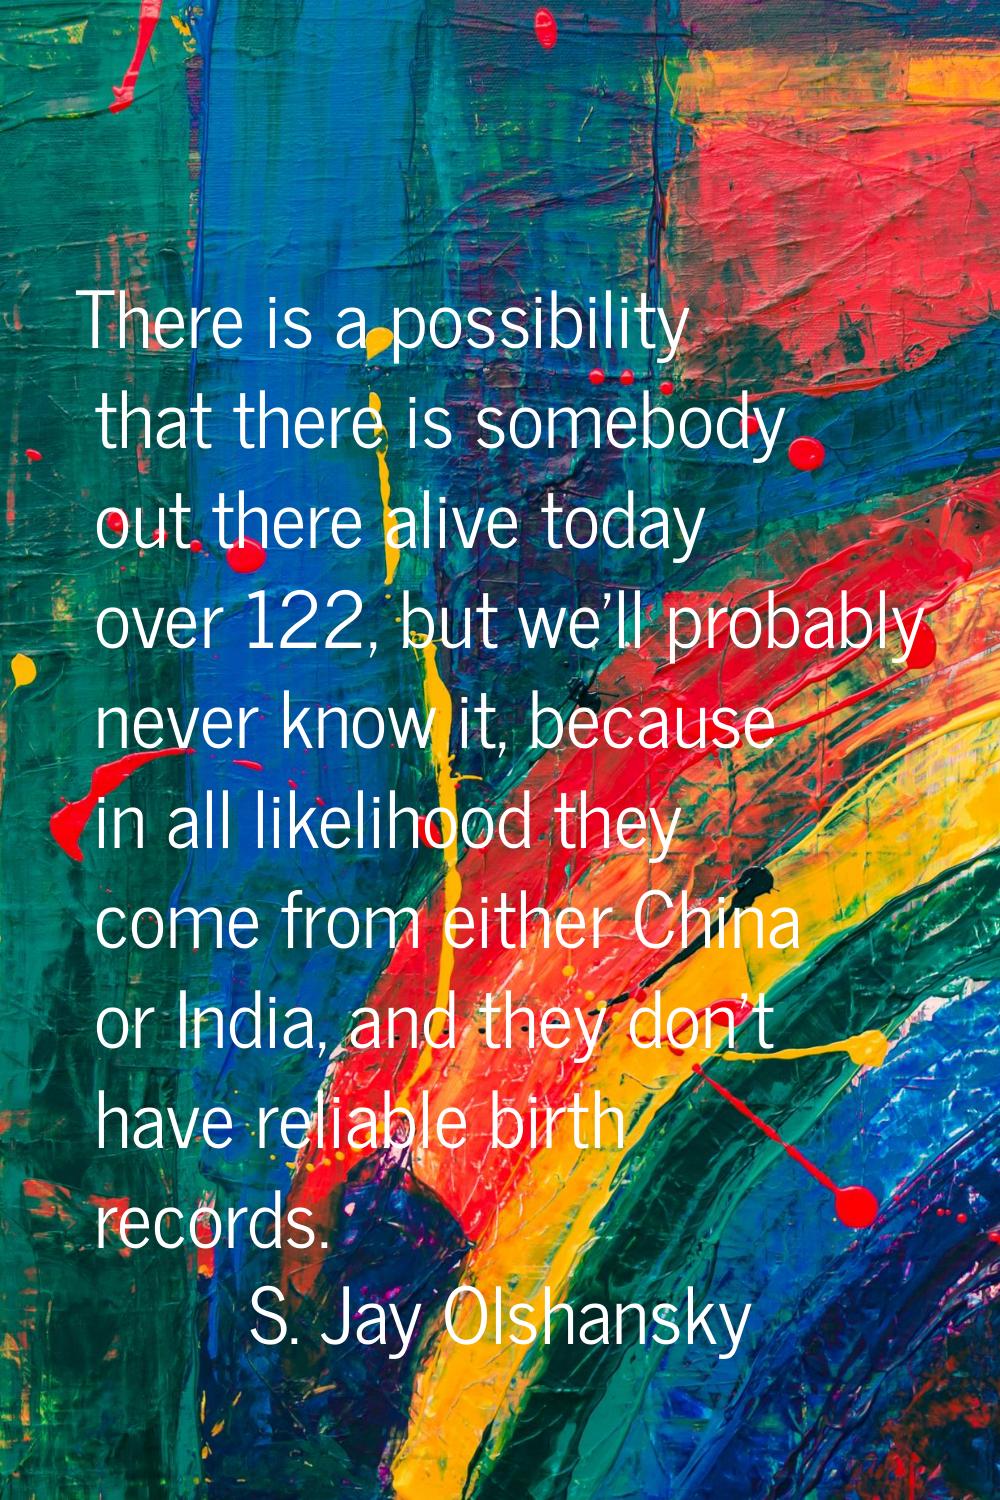 There is a possibility that there is somebody out there alive today over 122, but we'll probably ne